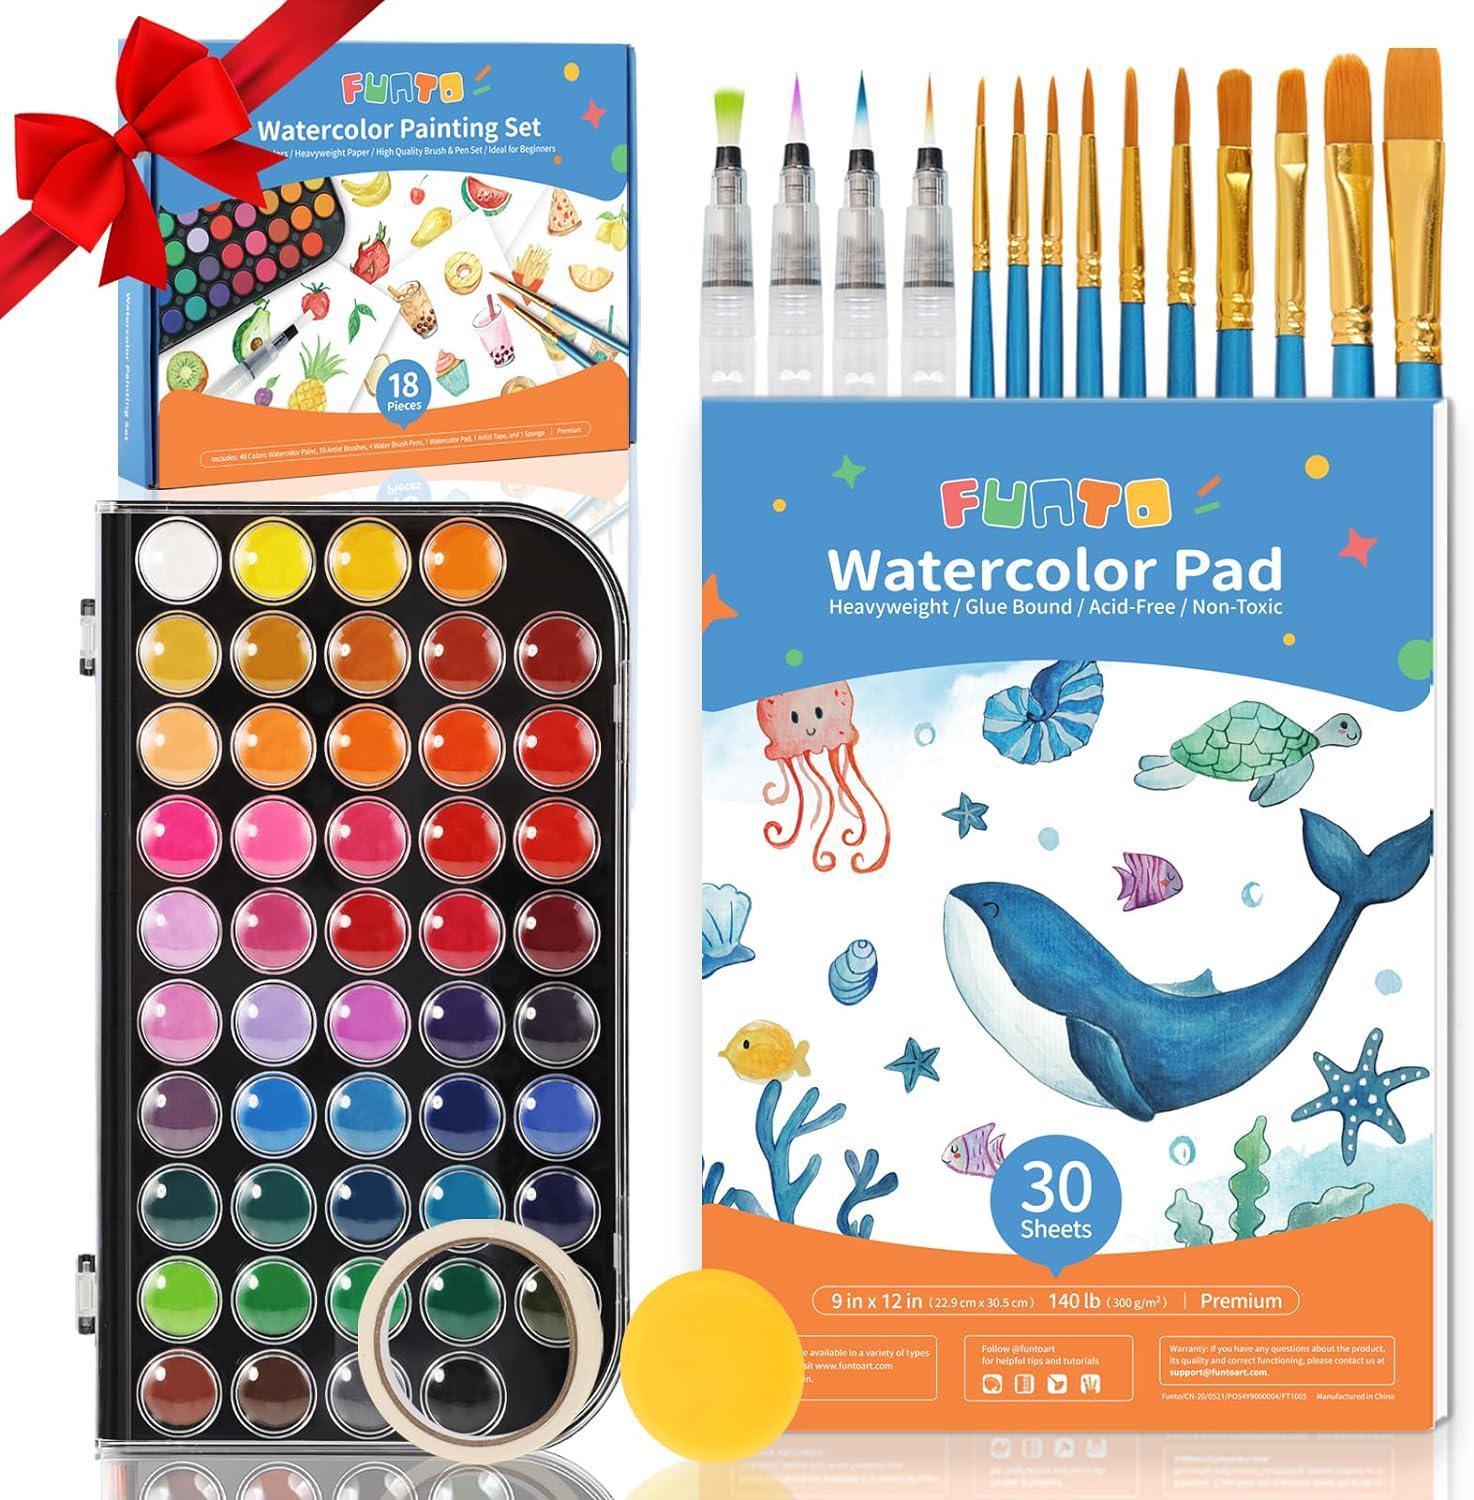 Nicpro Watercolor Paint Set, 48 Water Colors Kit with 8 Squirrel Brush